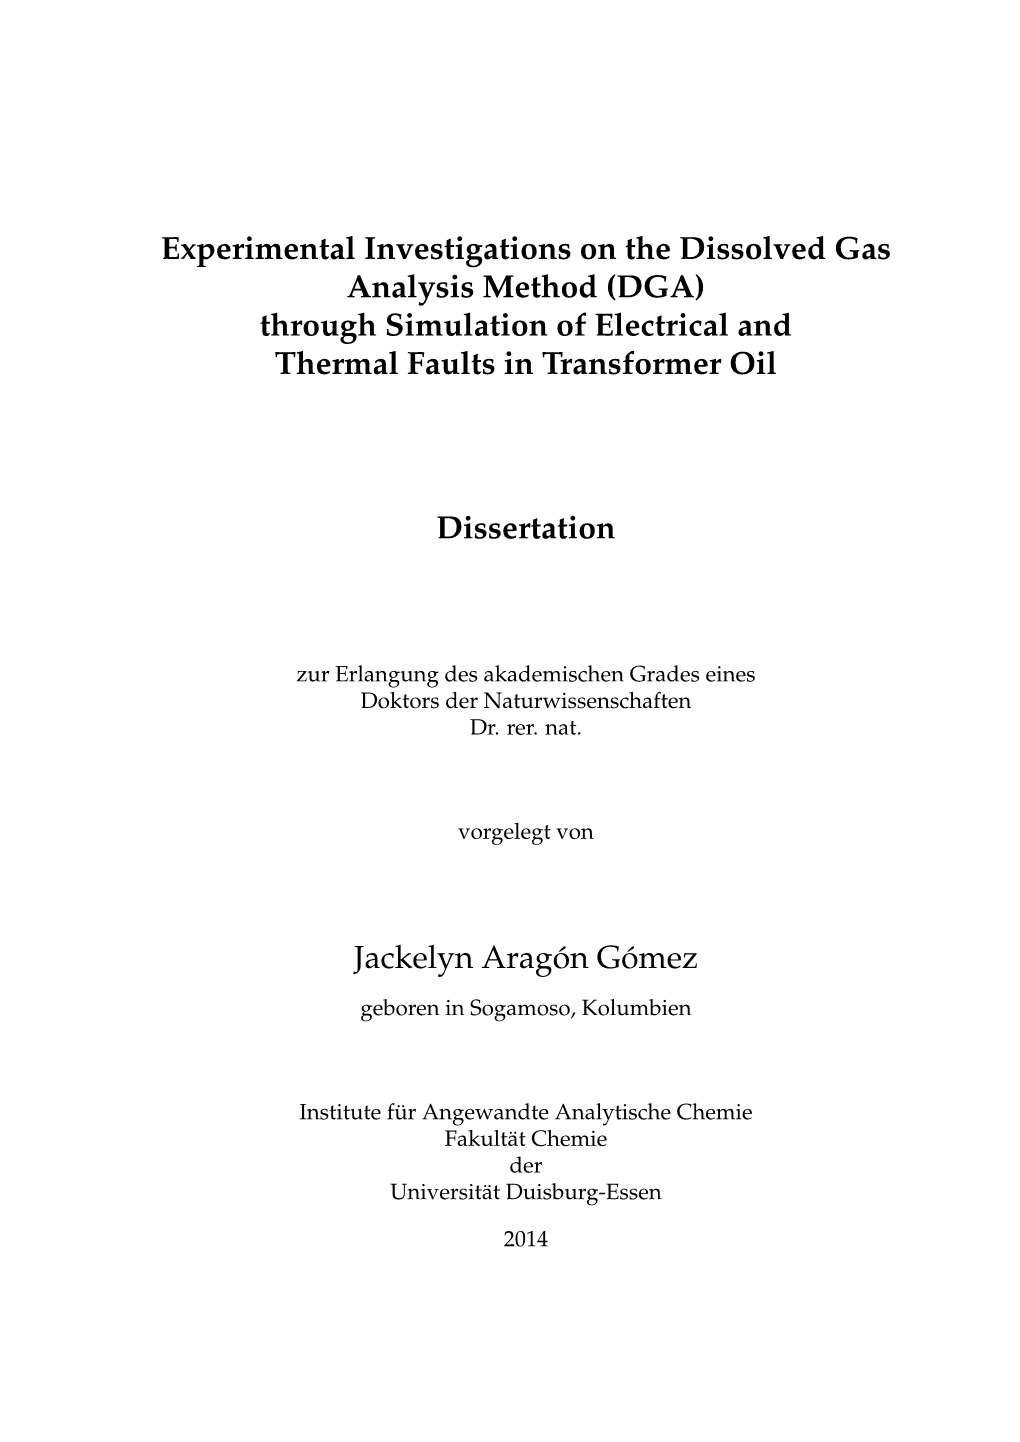 Experimental Investigations on the Dissolved Gas Analysis Method (DGA) Through Simulation of Electrical and Thermal Faults in Transformer Oil